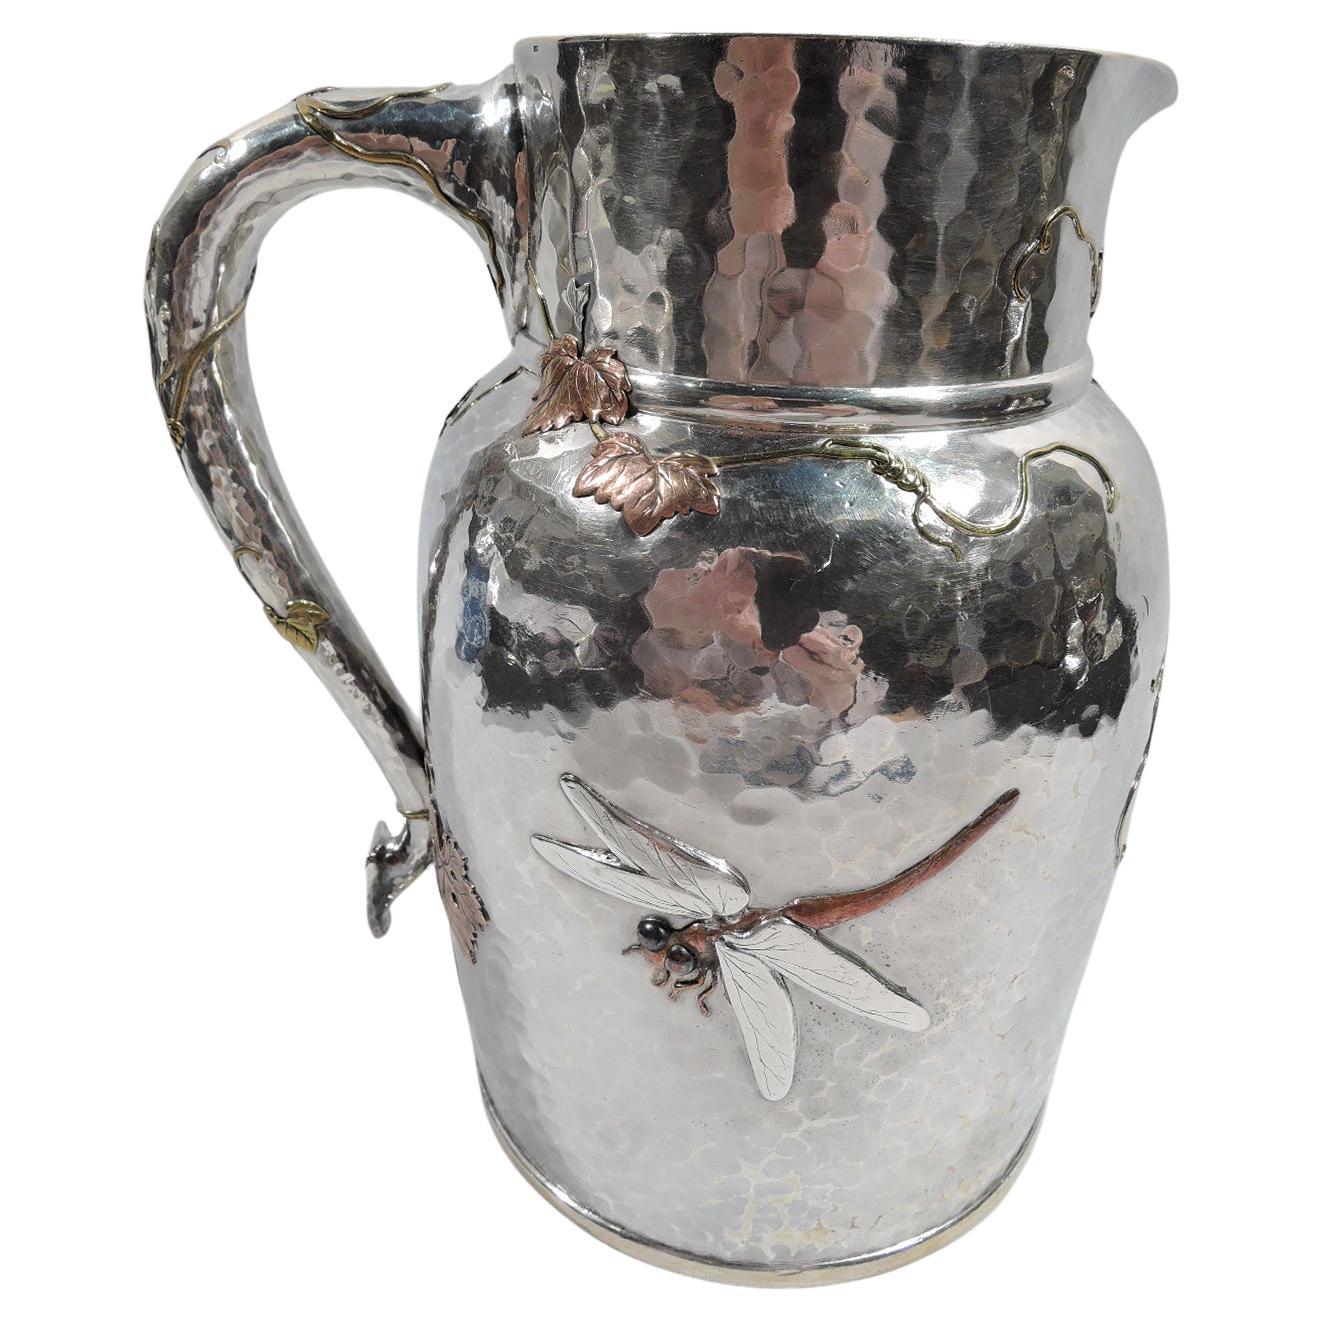 Market-Fresh Tiffany Japonesque Mixed Metal Dragonfly Water Pitcher